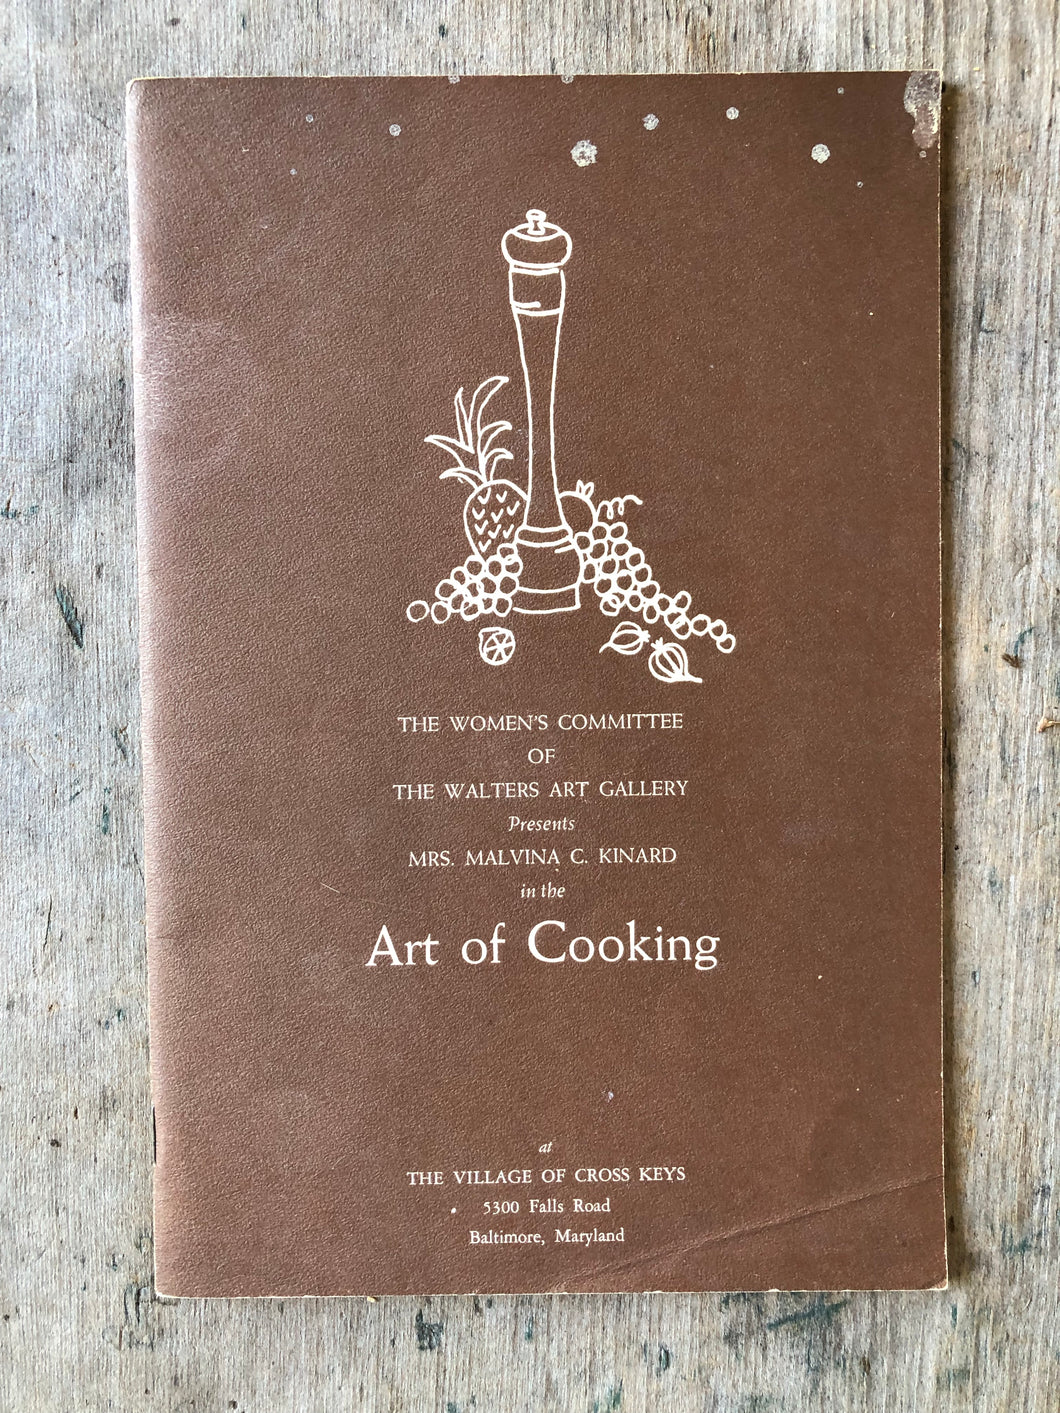 The Women’s Committee of The Walters Art Gallery Presents Mrs. Malvina C. Kinard in the Art of Cooking